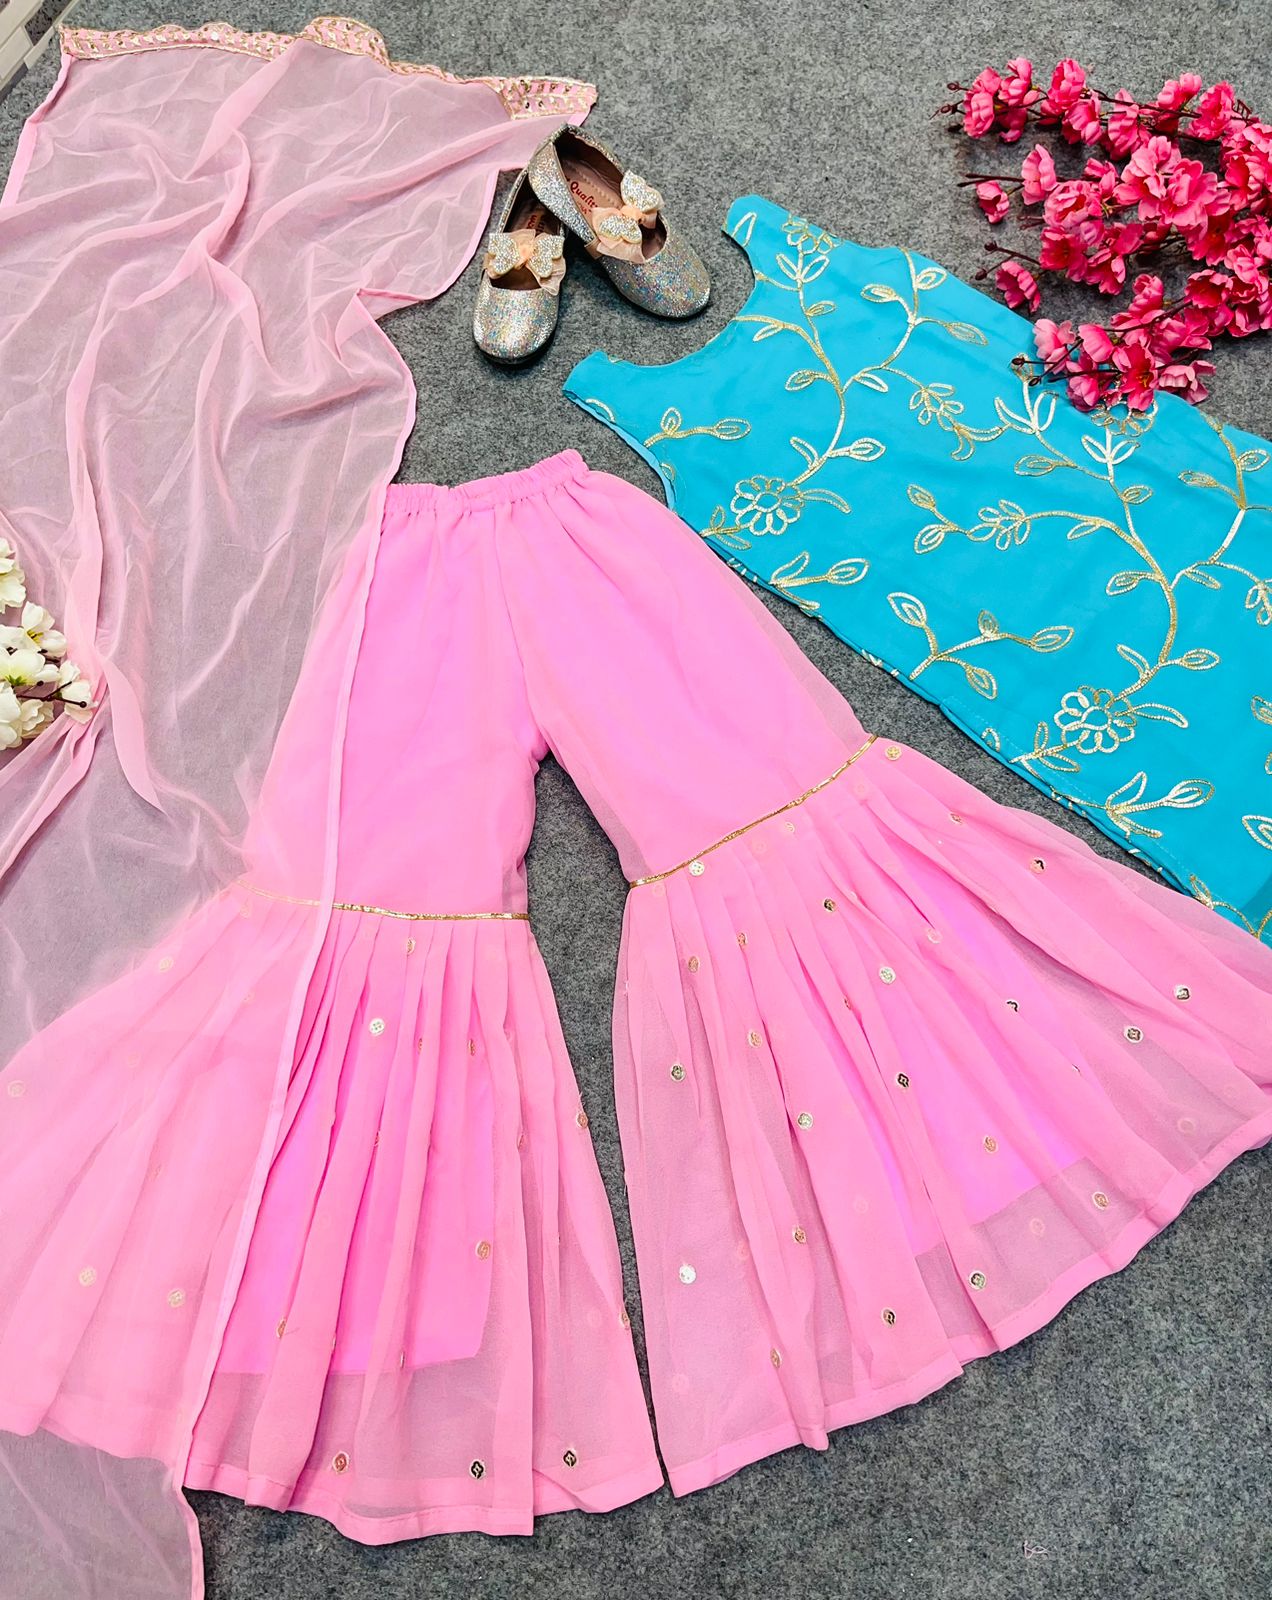 RE - Designer Party Wear Pink And Green Sharara Suit - Featured Product